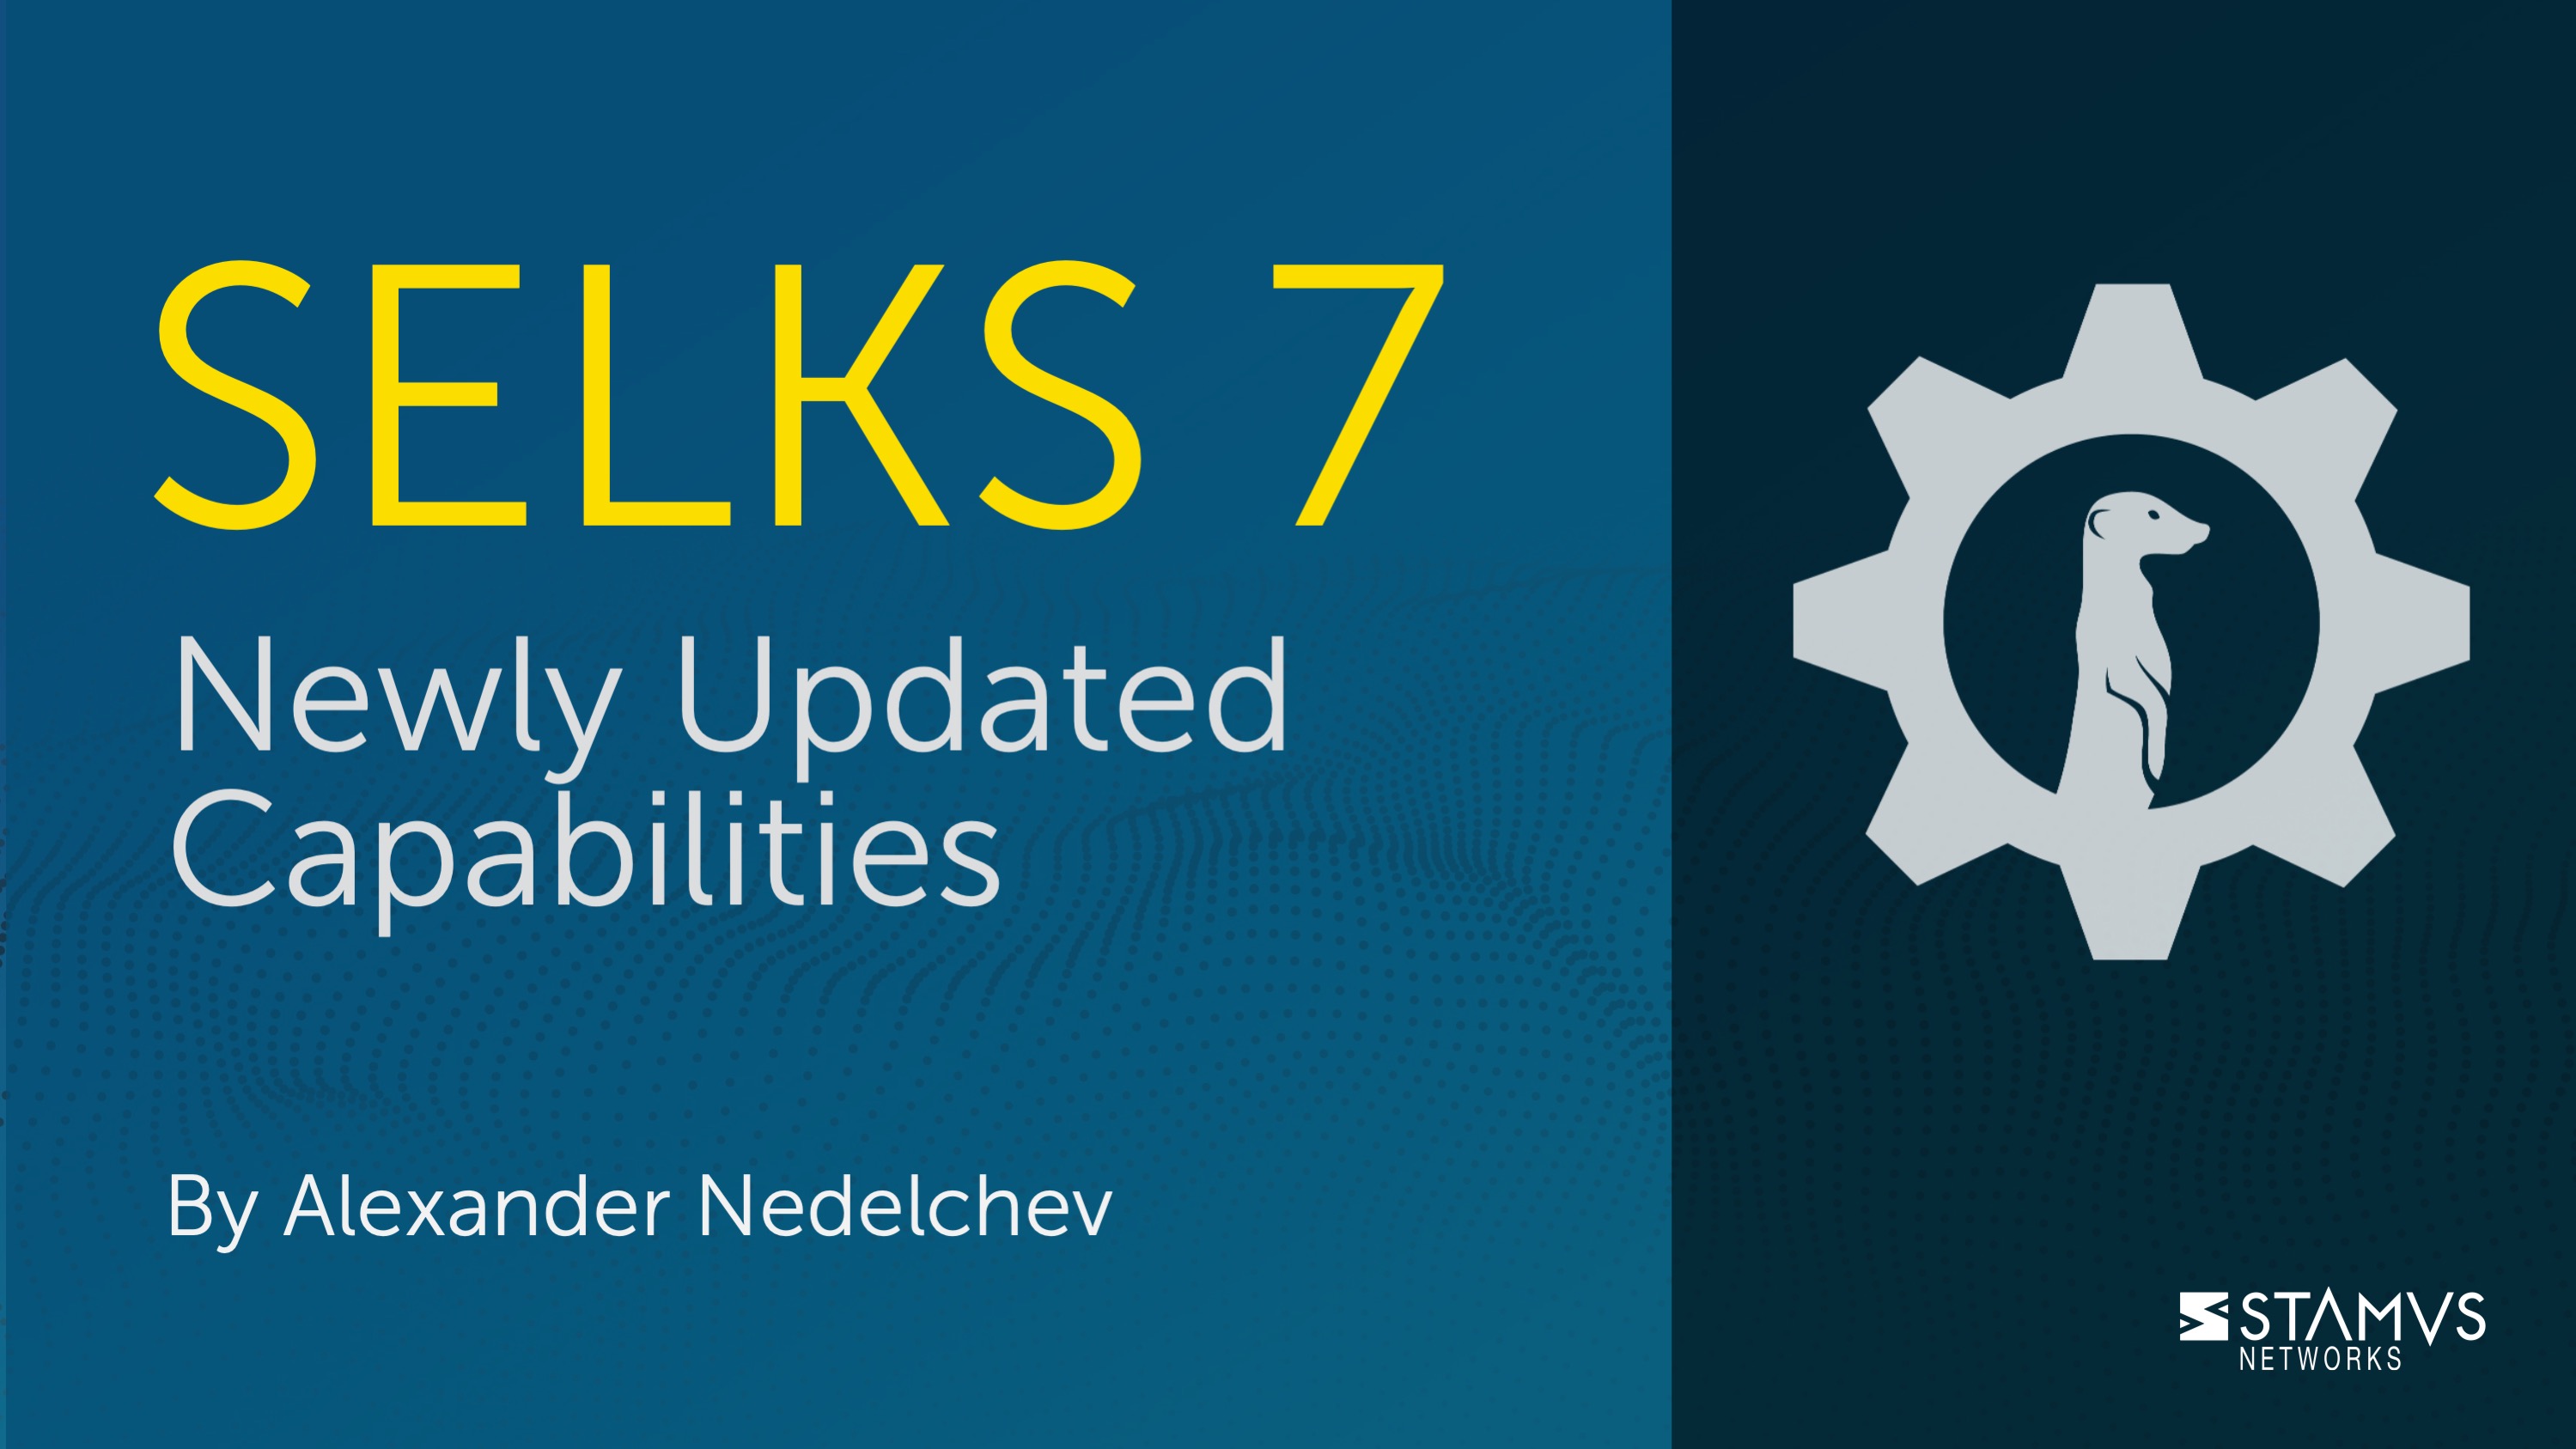 SELKS 7: Newly Updated Capabilities by Alexander Nedelchev